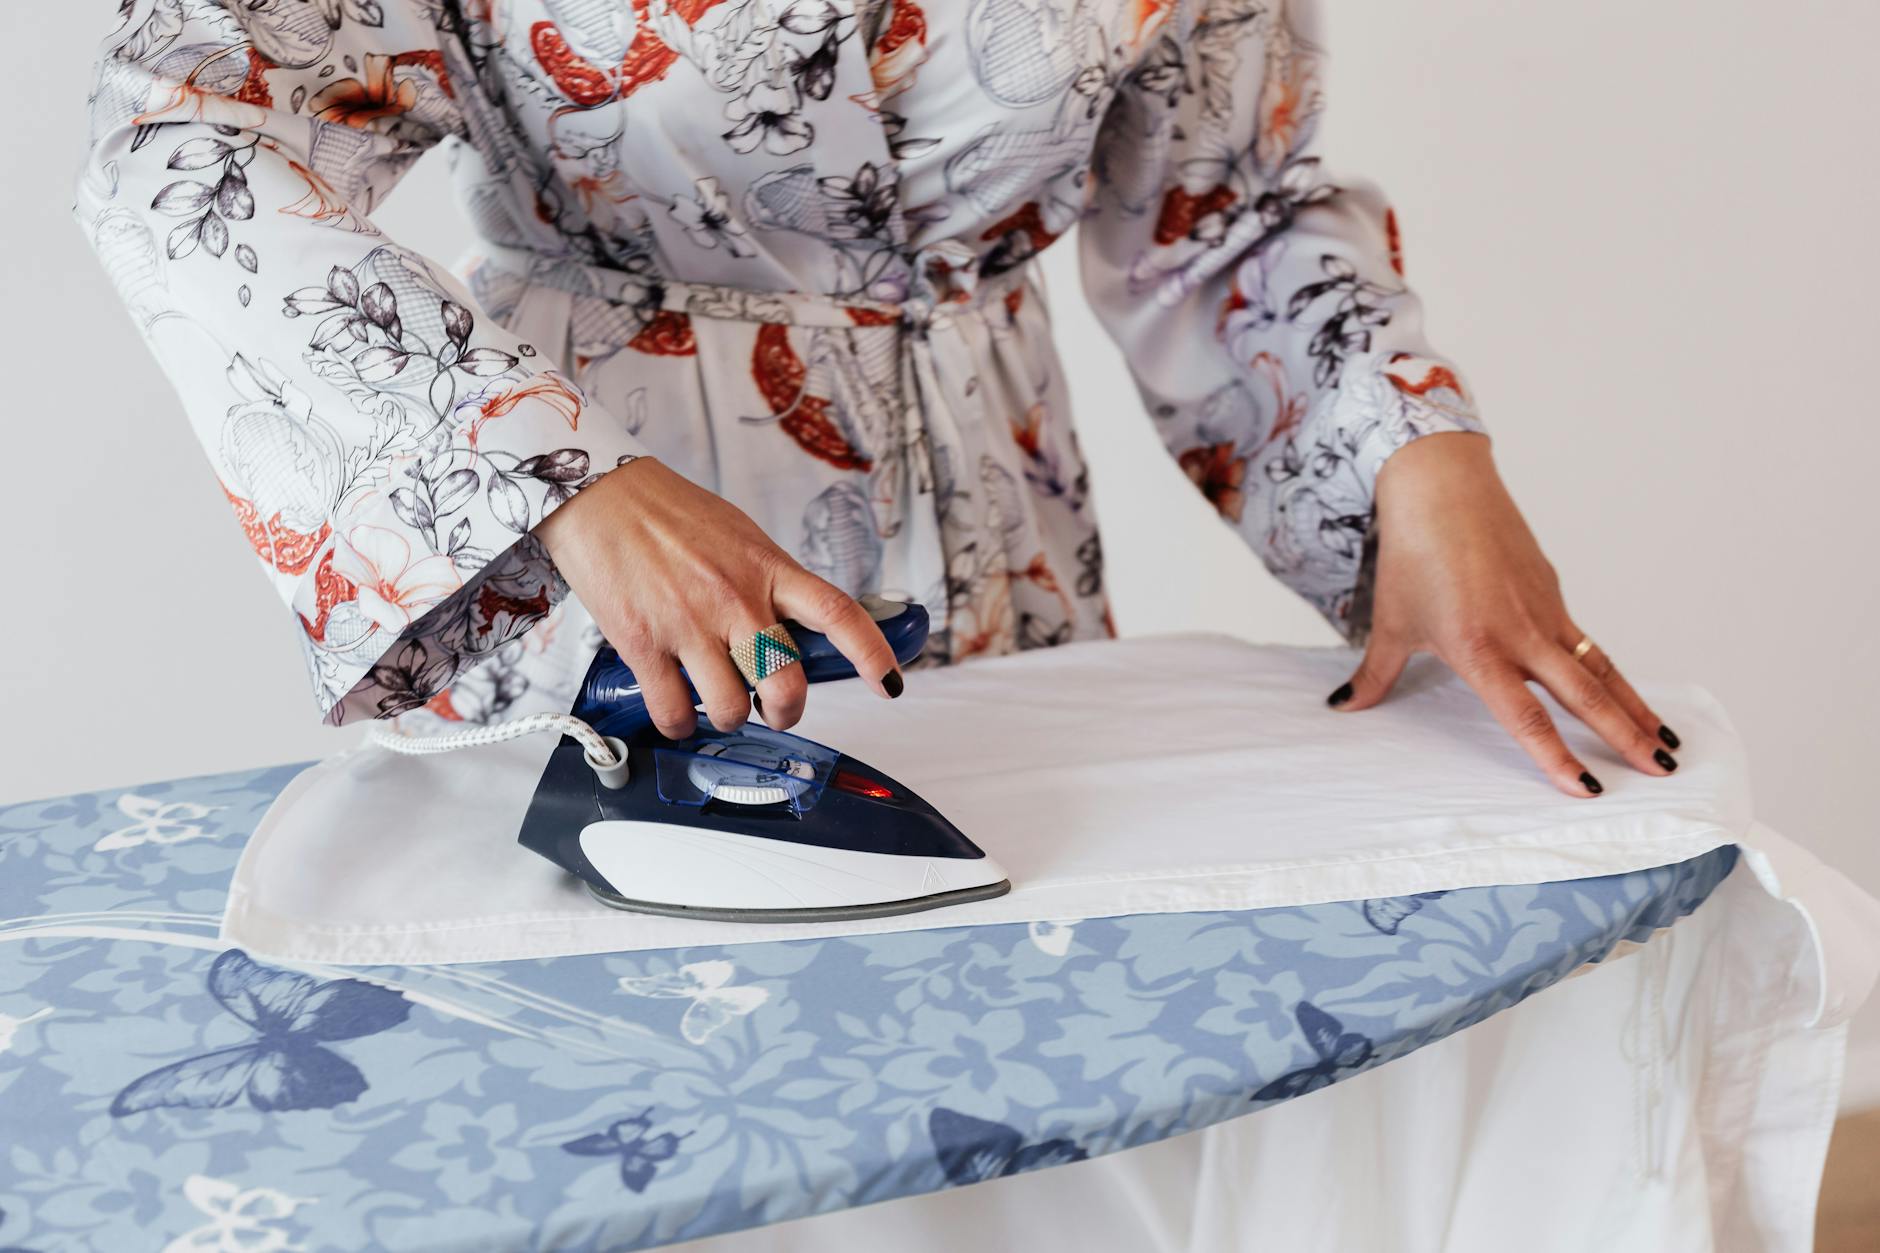 Crop faceless female in stylish silk robe ironing formal white shirt on blue ironing board by using contemporary small iron against white plain wall